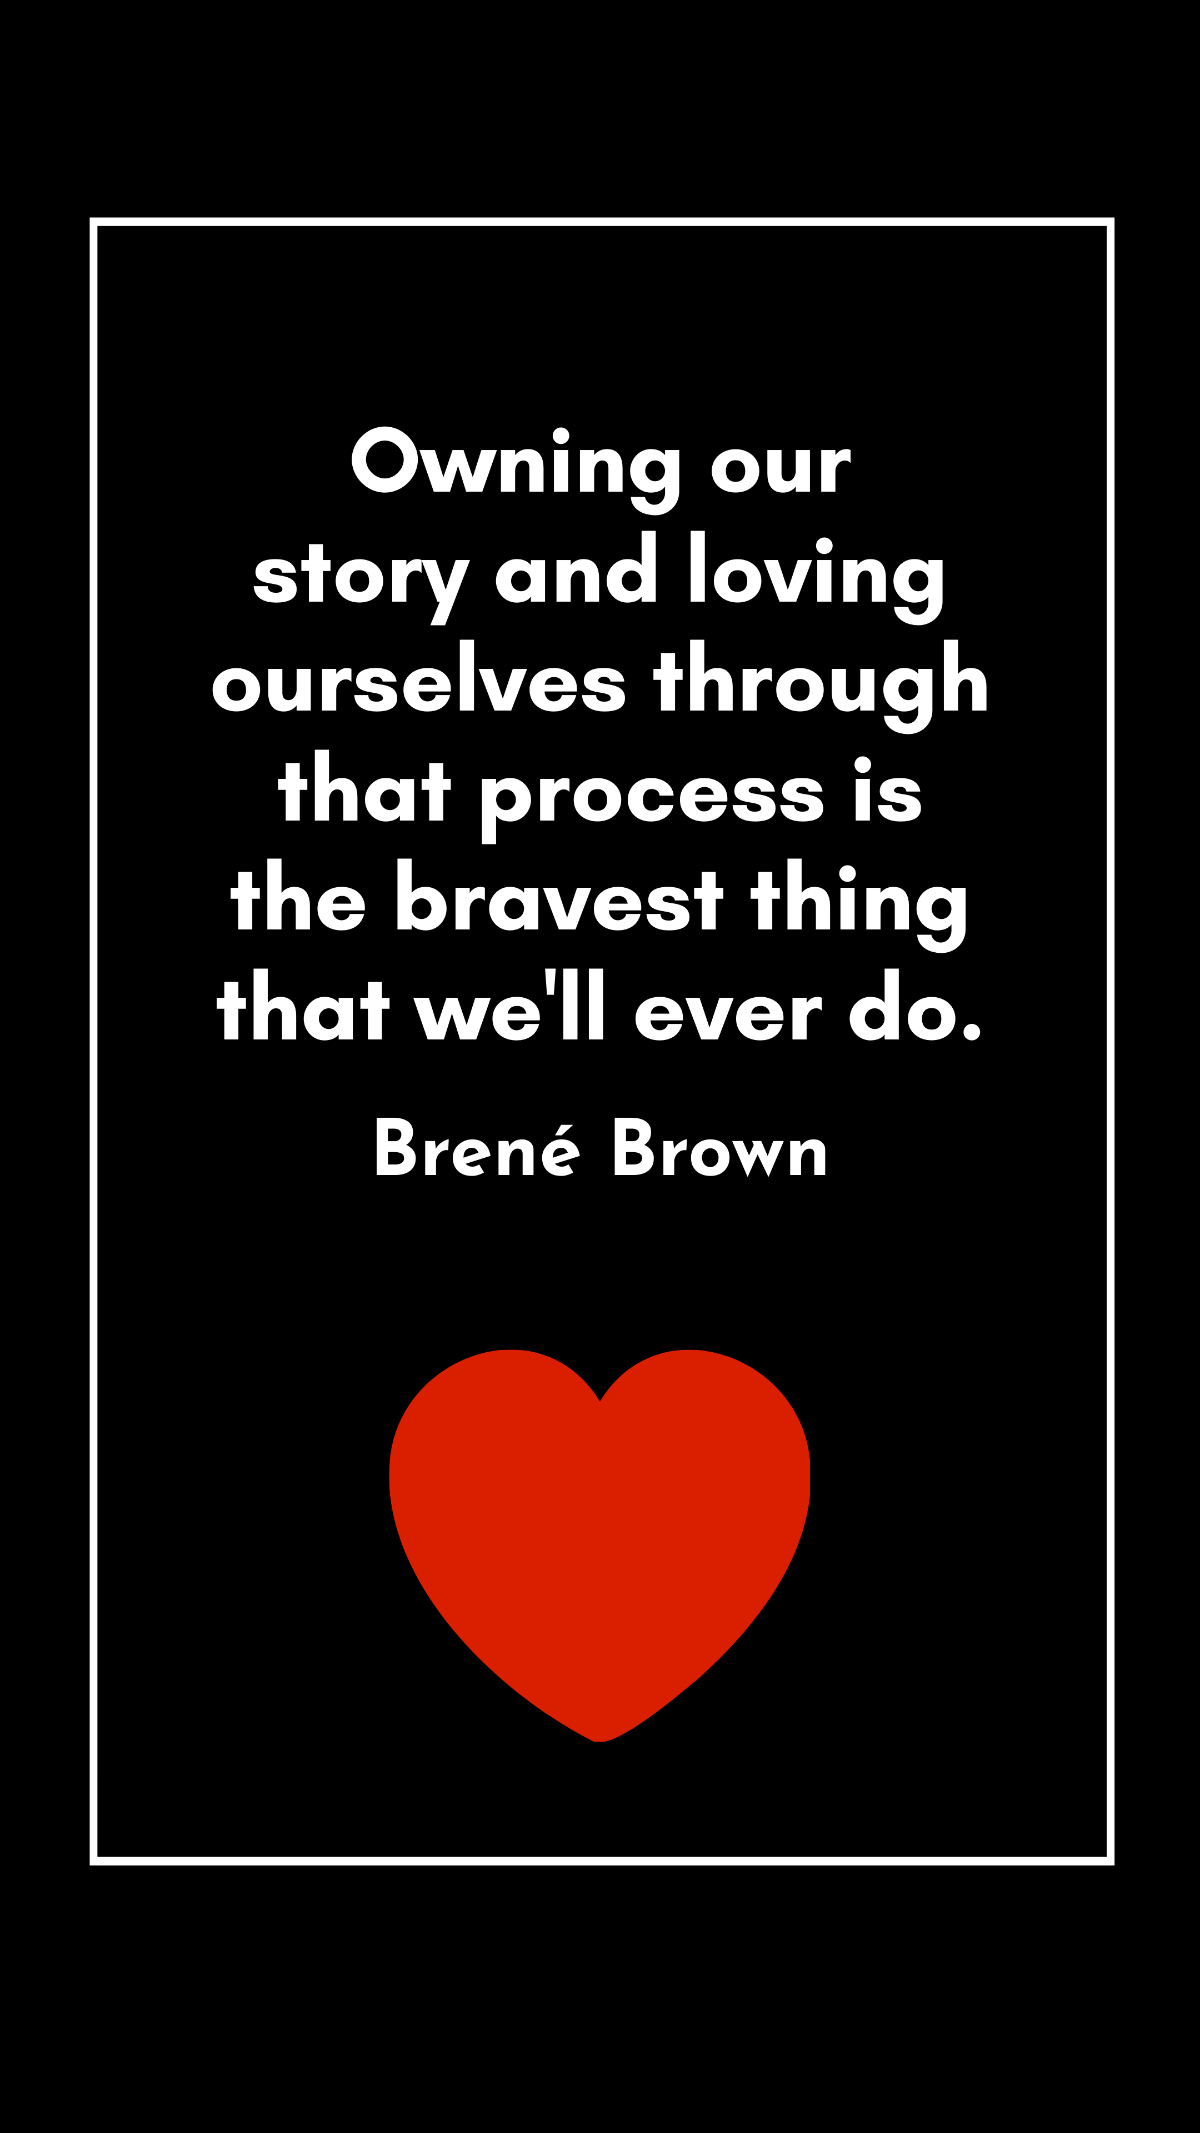 Free Brené Brown - Owning our story and loving ourselves through that process is the bravest thing that we'll ever do. Template